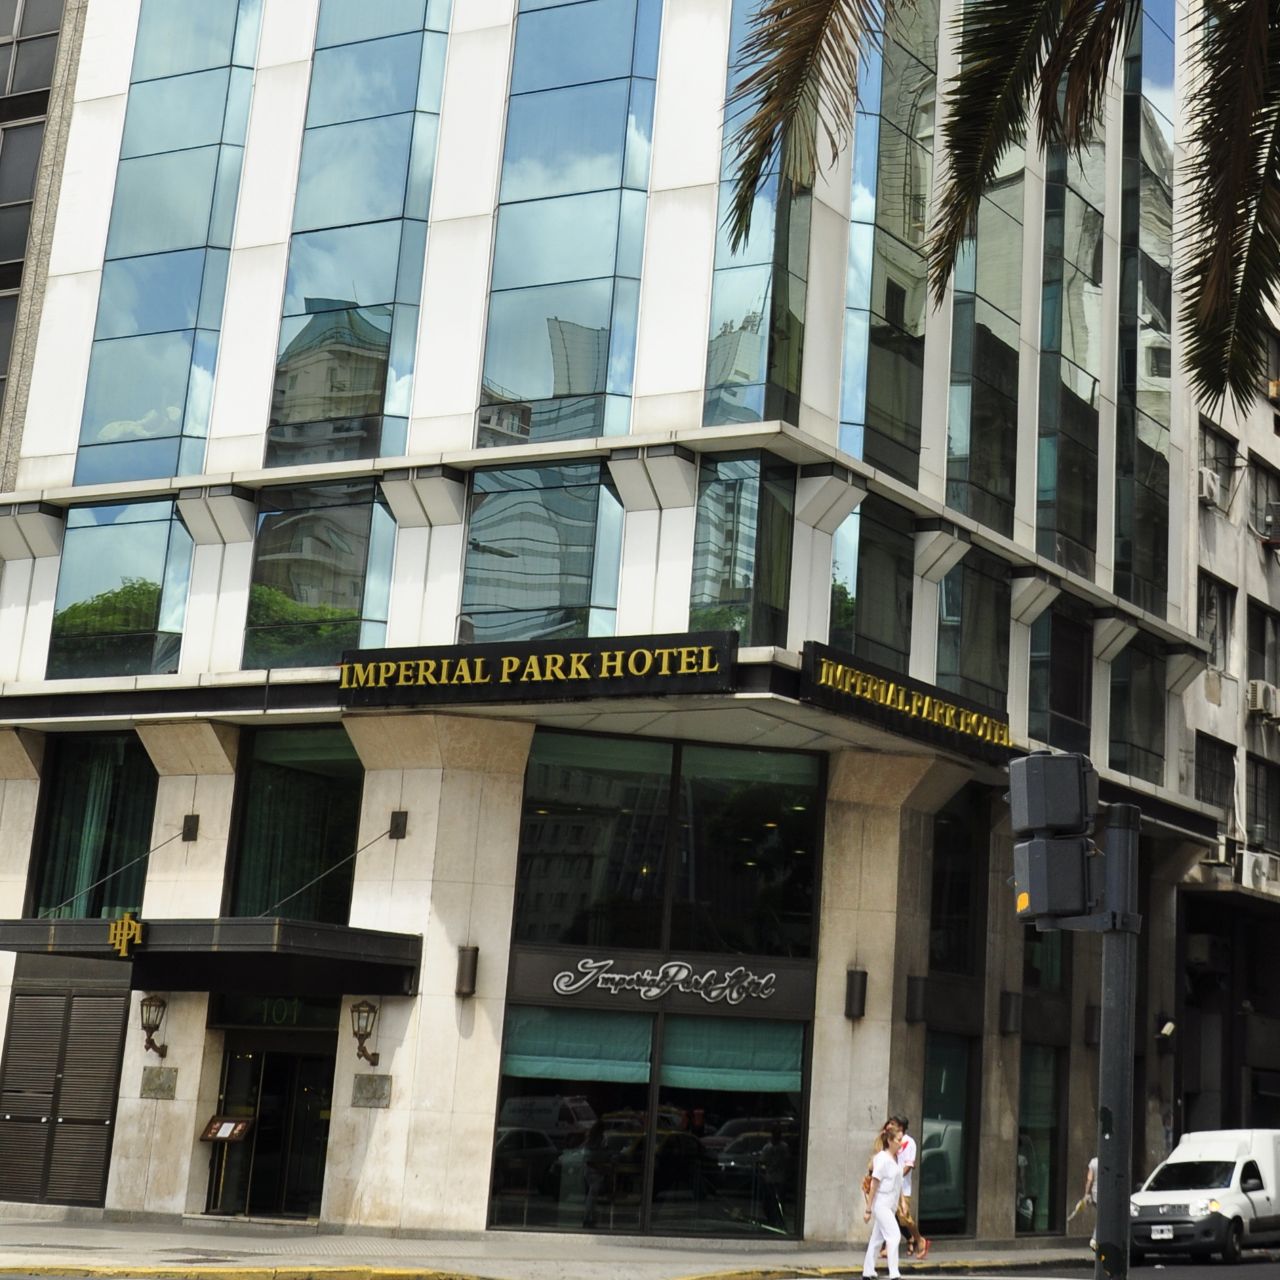 Hotel Imperial Park - Buenos Aires - HOTEL INFO